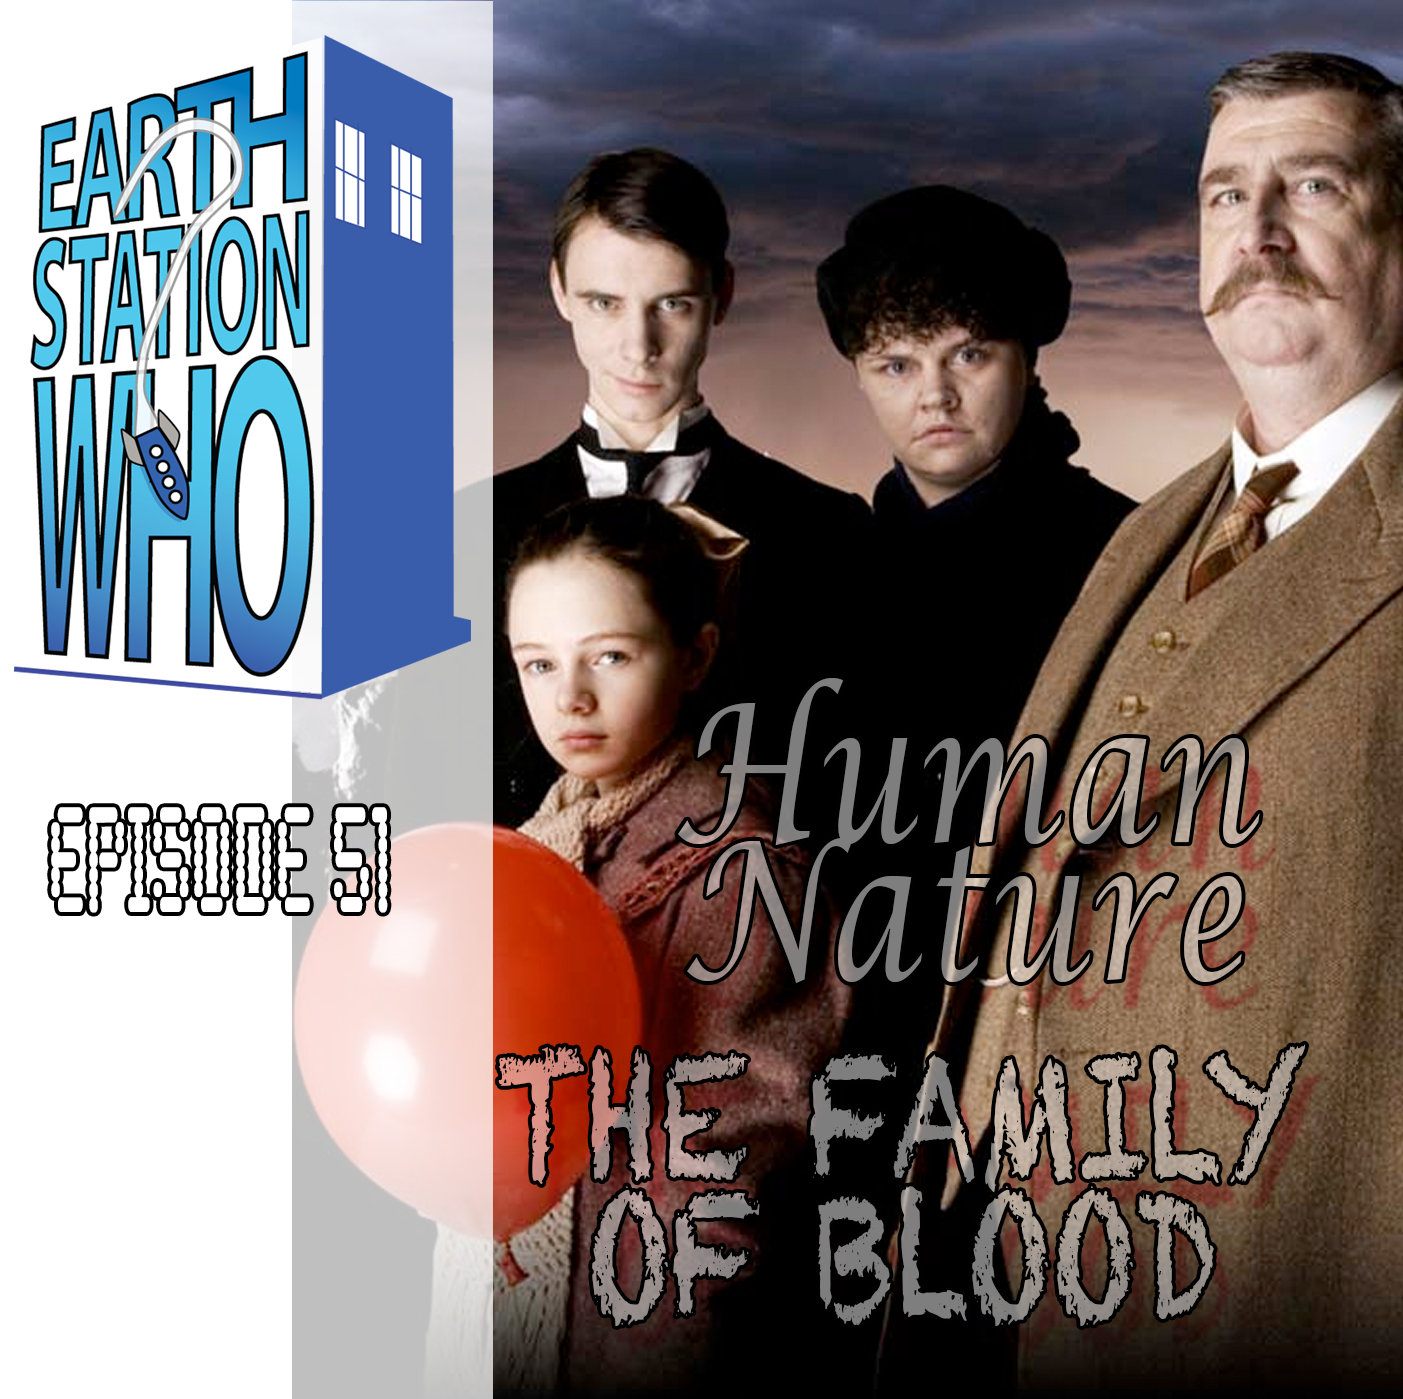 Earth Station Who Ep 51